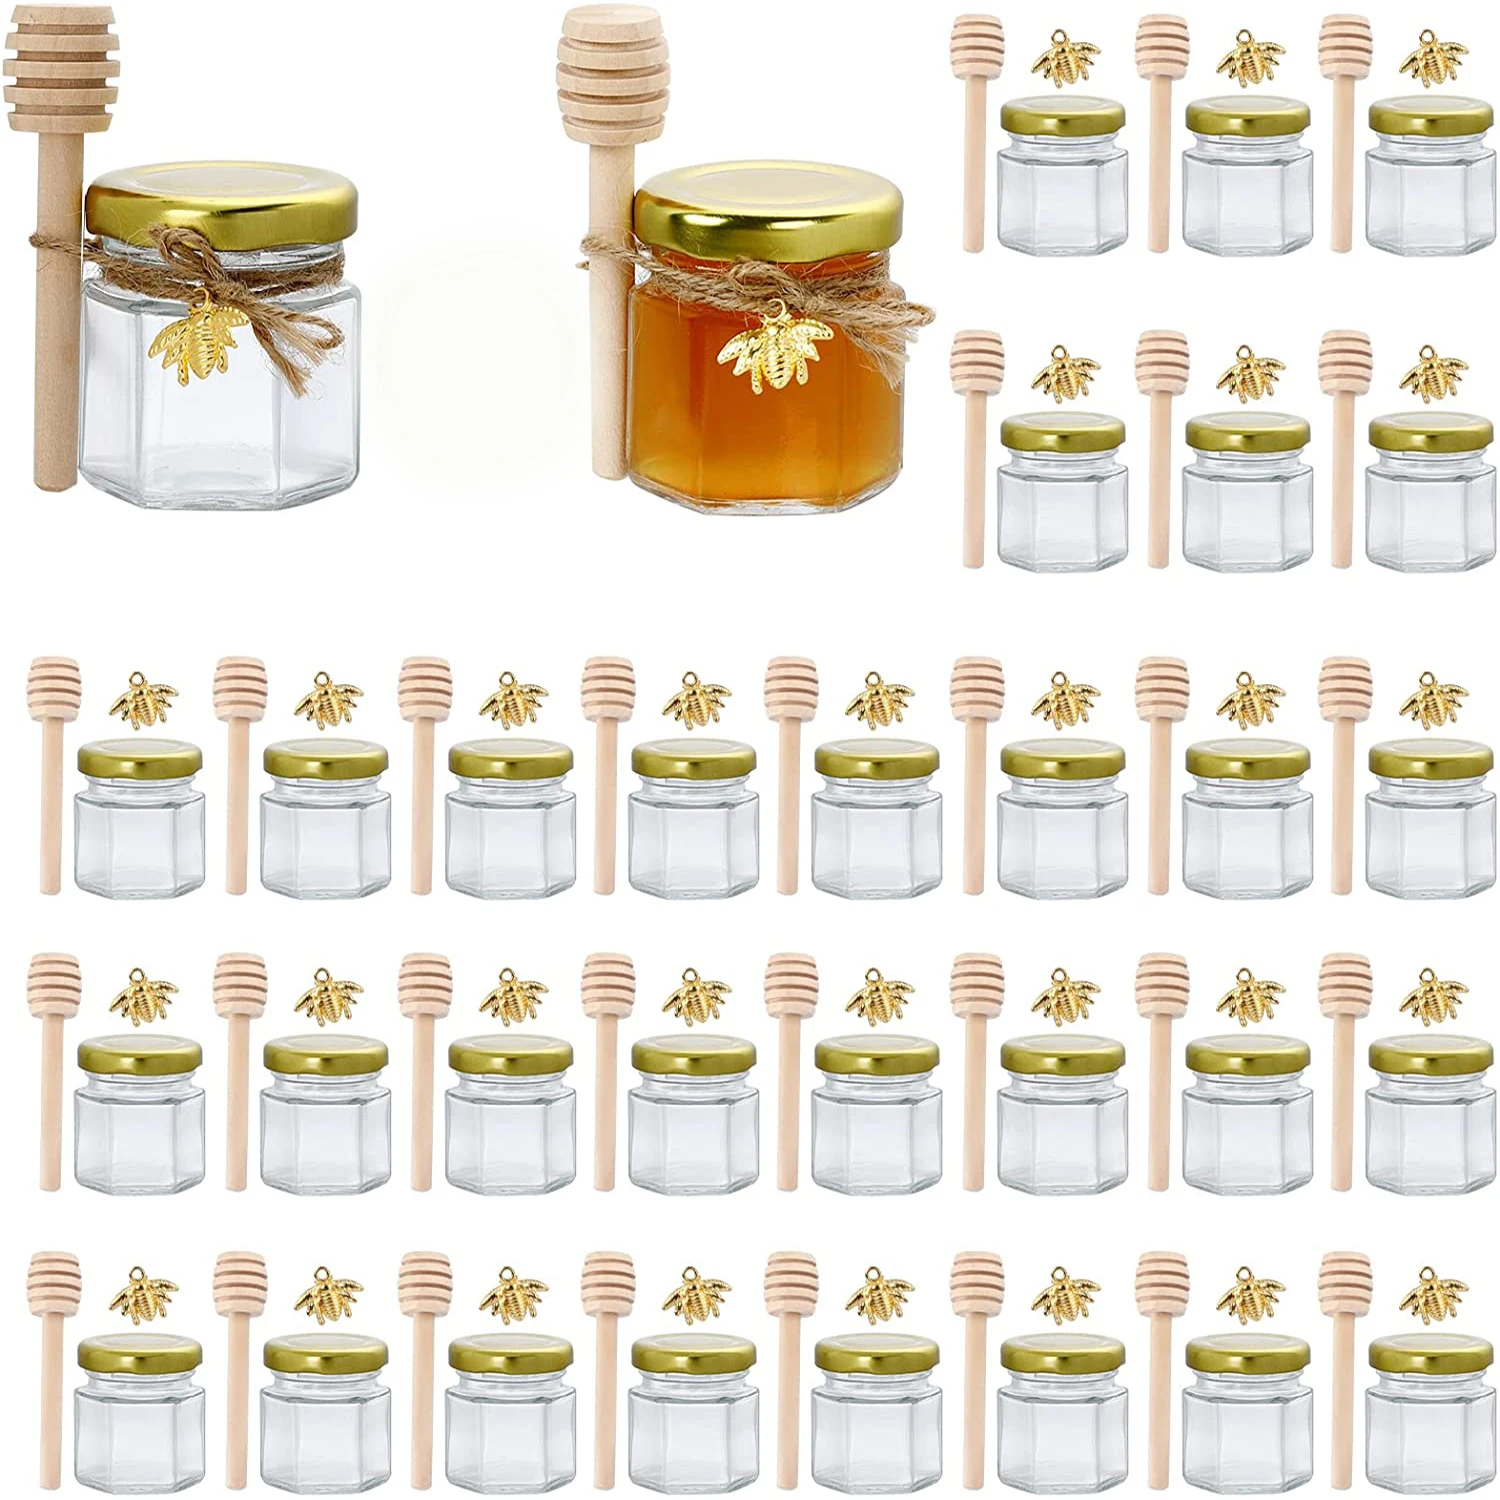 

Hexagon Mini Glass Jar with Wood Dipper Gold Lid Bee Small Containers Bottles for Jam Candies Baby Shower Wedding Party Favors